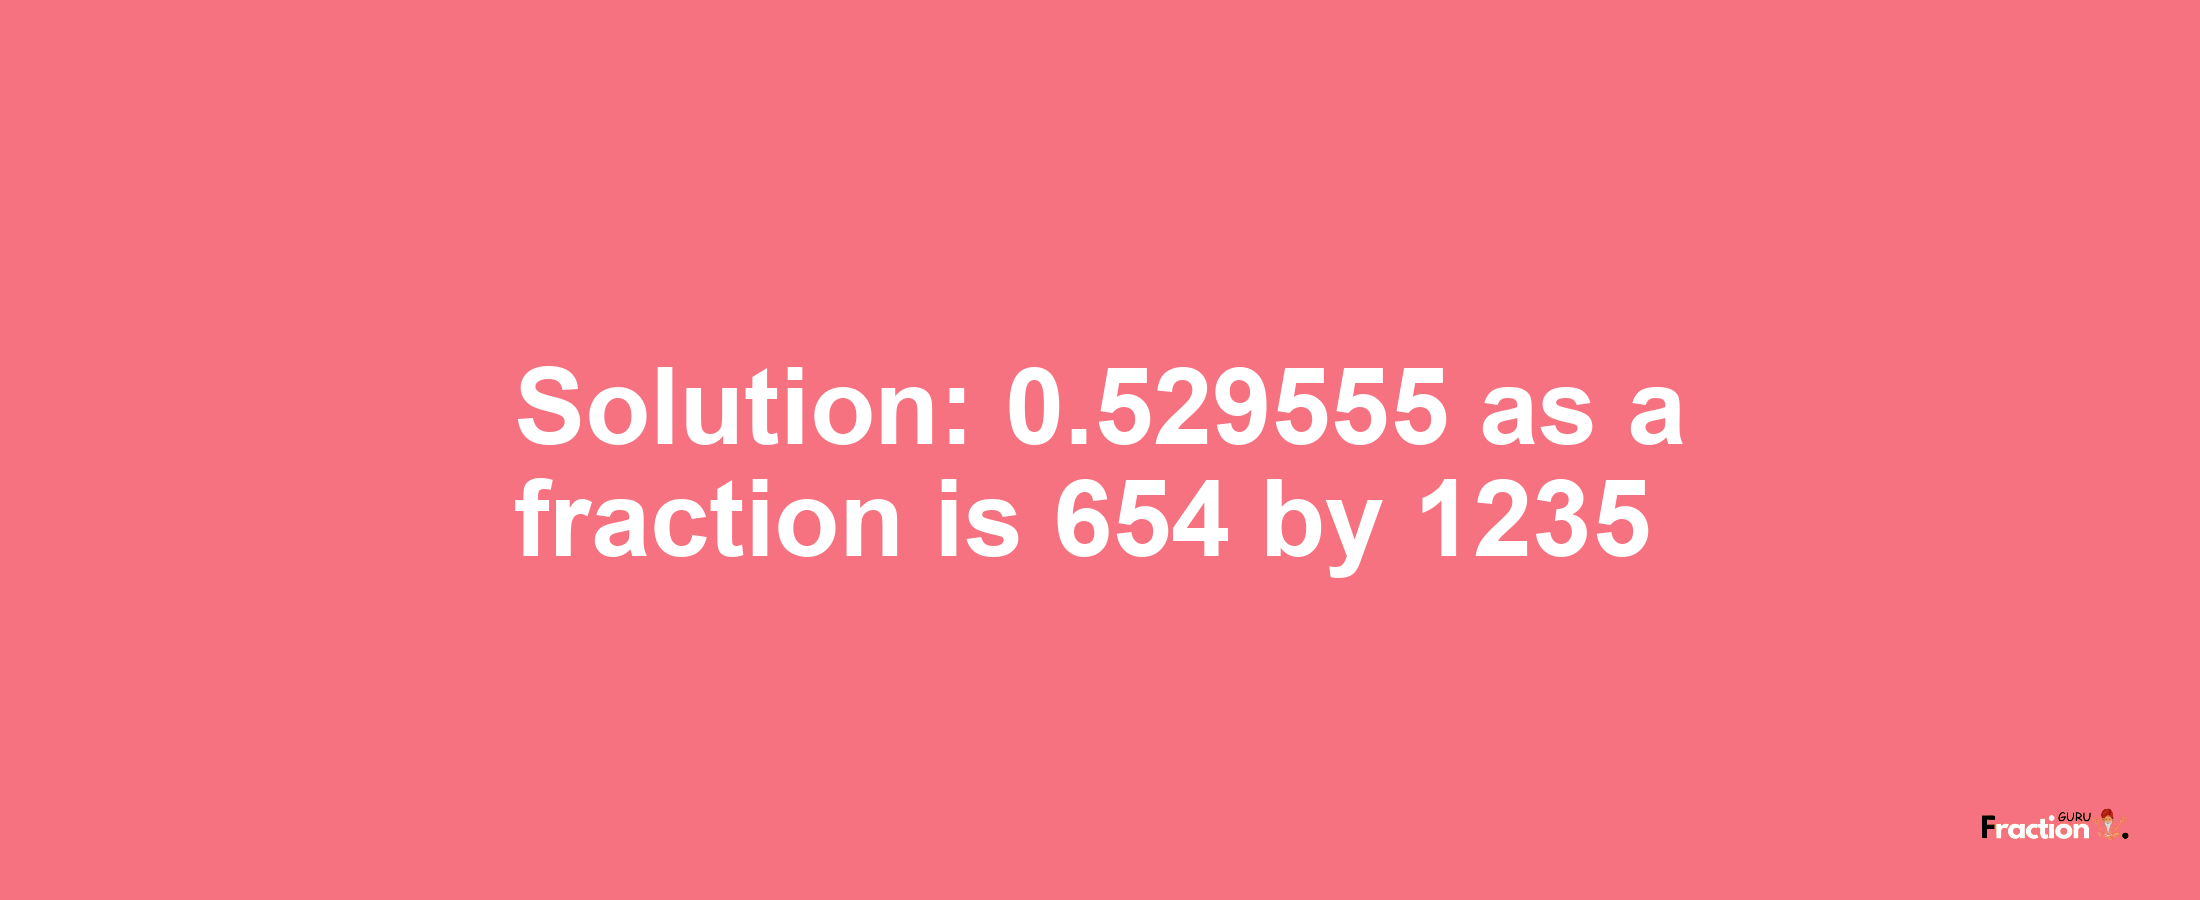 Solution:0.529555 as a fraction is 654/1235